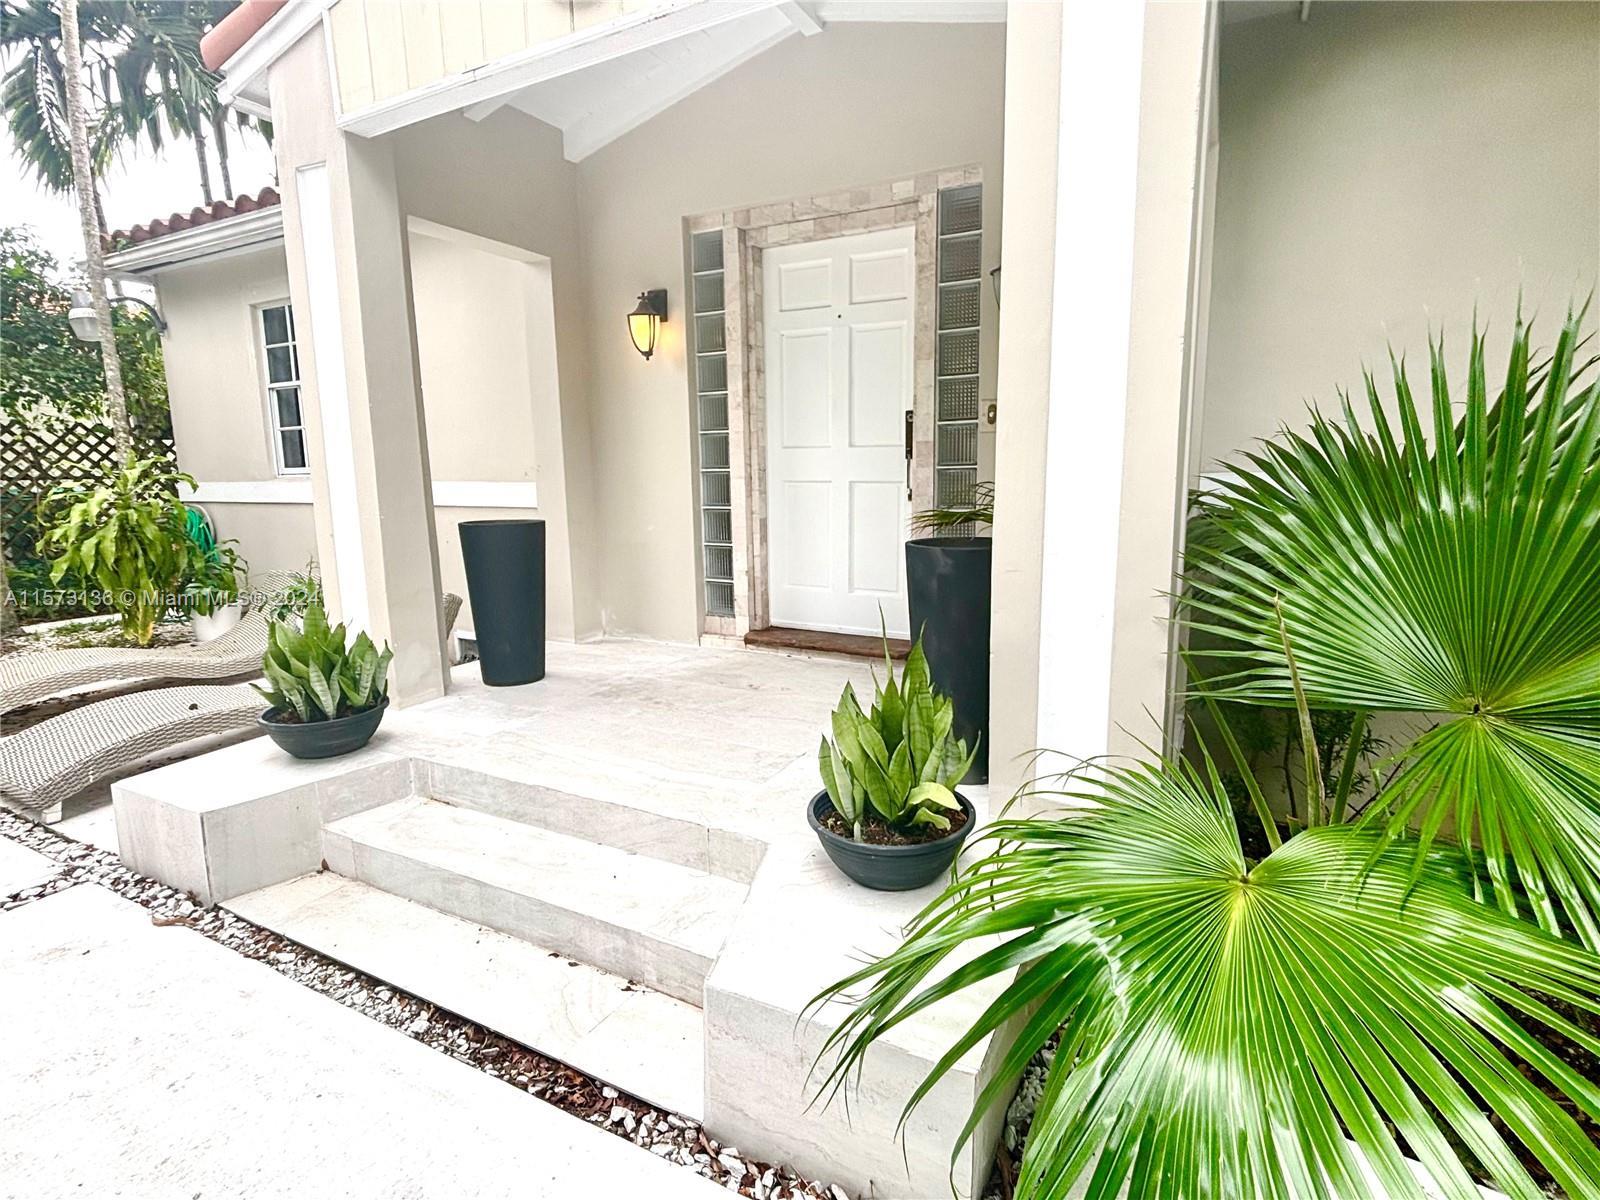 Beautifully remodeled 3 bedroom 2 bath house in desirable Coconut Grove.
Stunning REMODELED kitchen